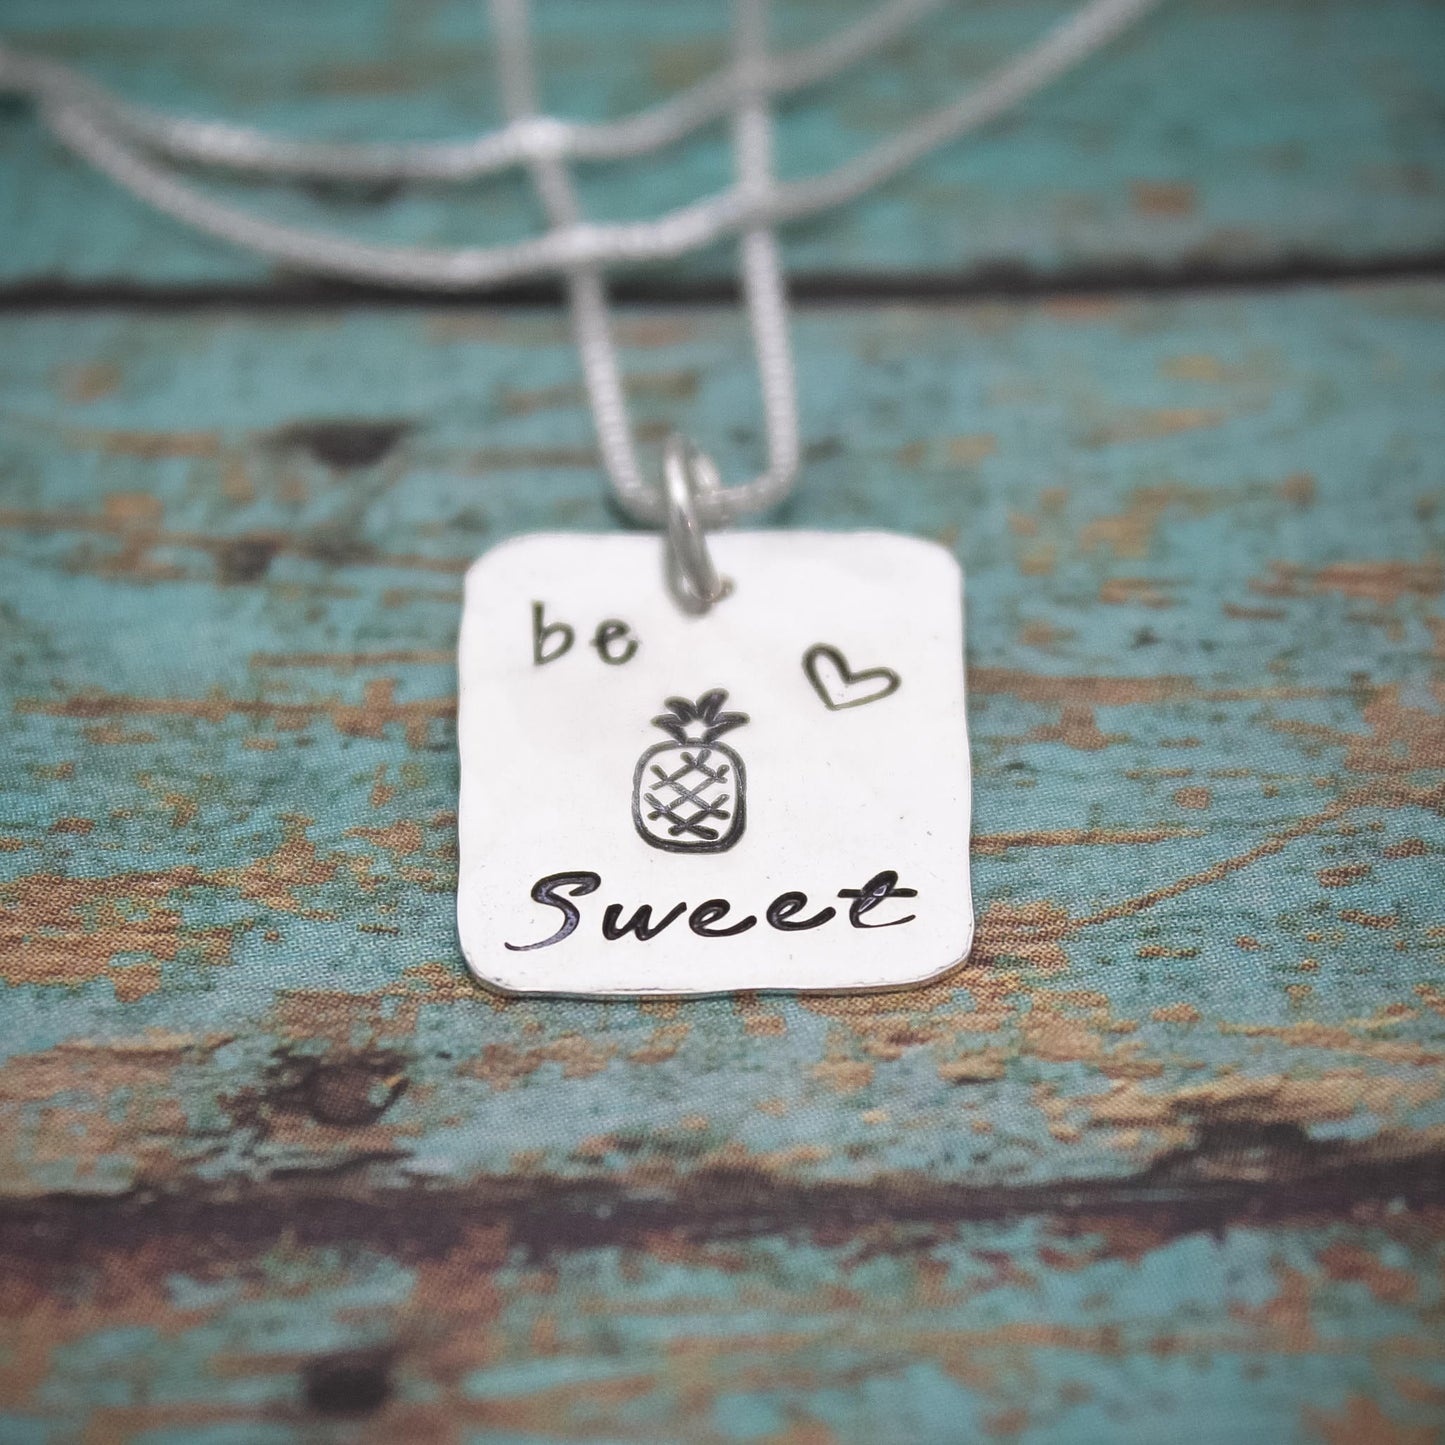 Be Sweet Pineapple Necklace, Pineapple Jewelry, Sterling Silver Pineapple Necklace, BFF Gift, Cute Pineapple Gift,  Hand Stamped Jewelry